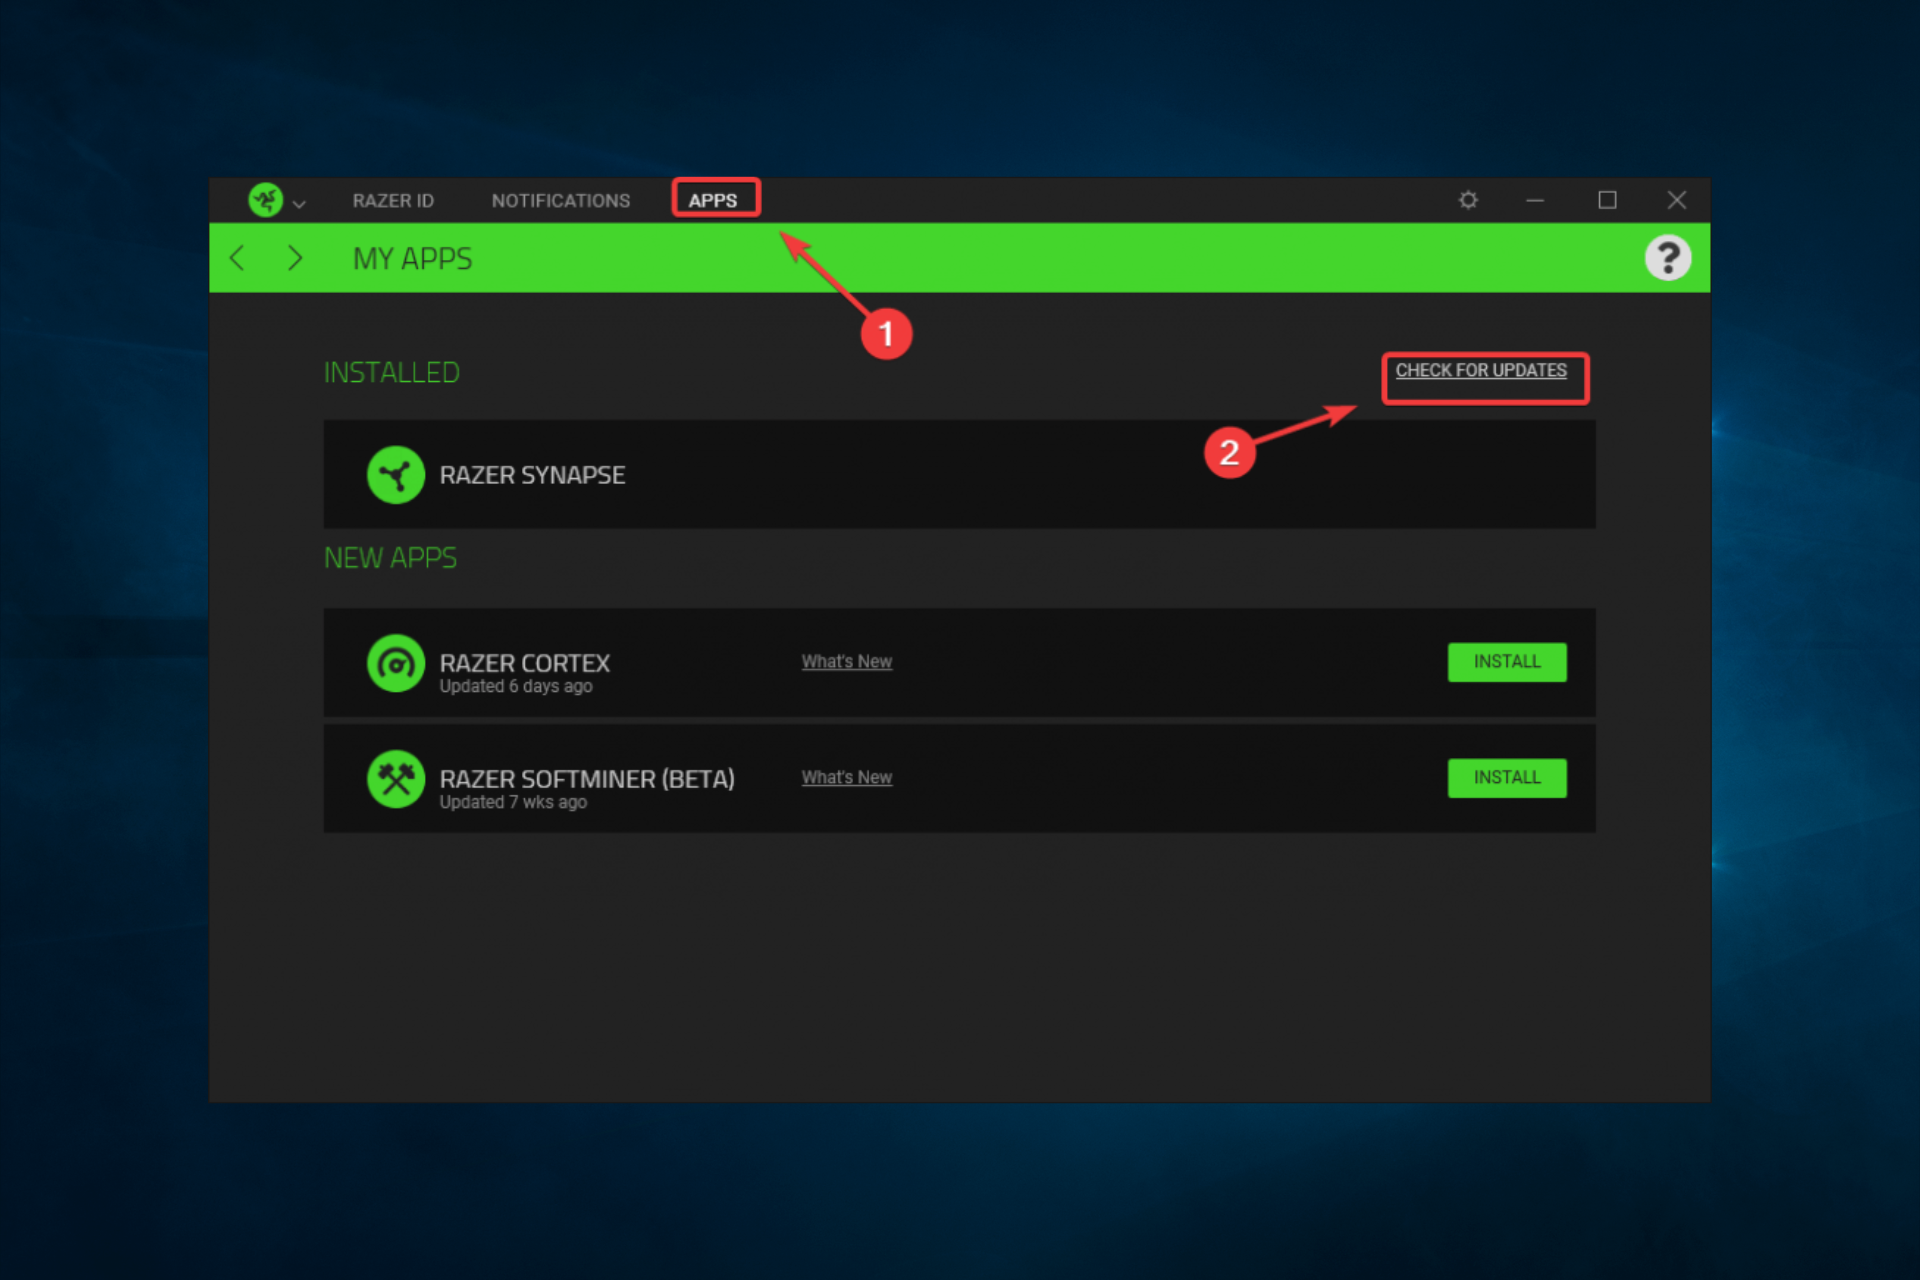 Chroma Connect not Working: Enable it With These 4 Methods